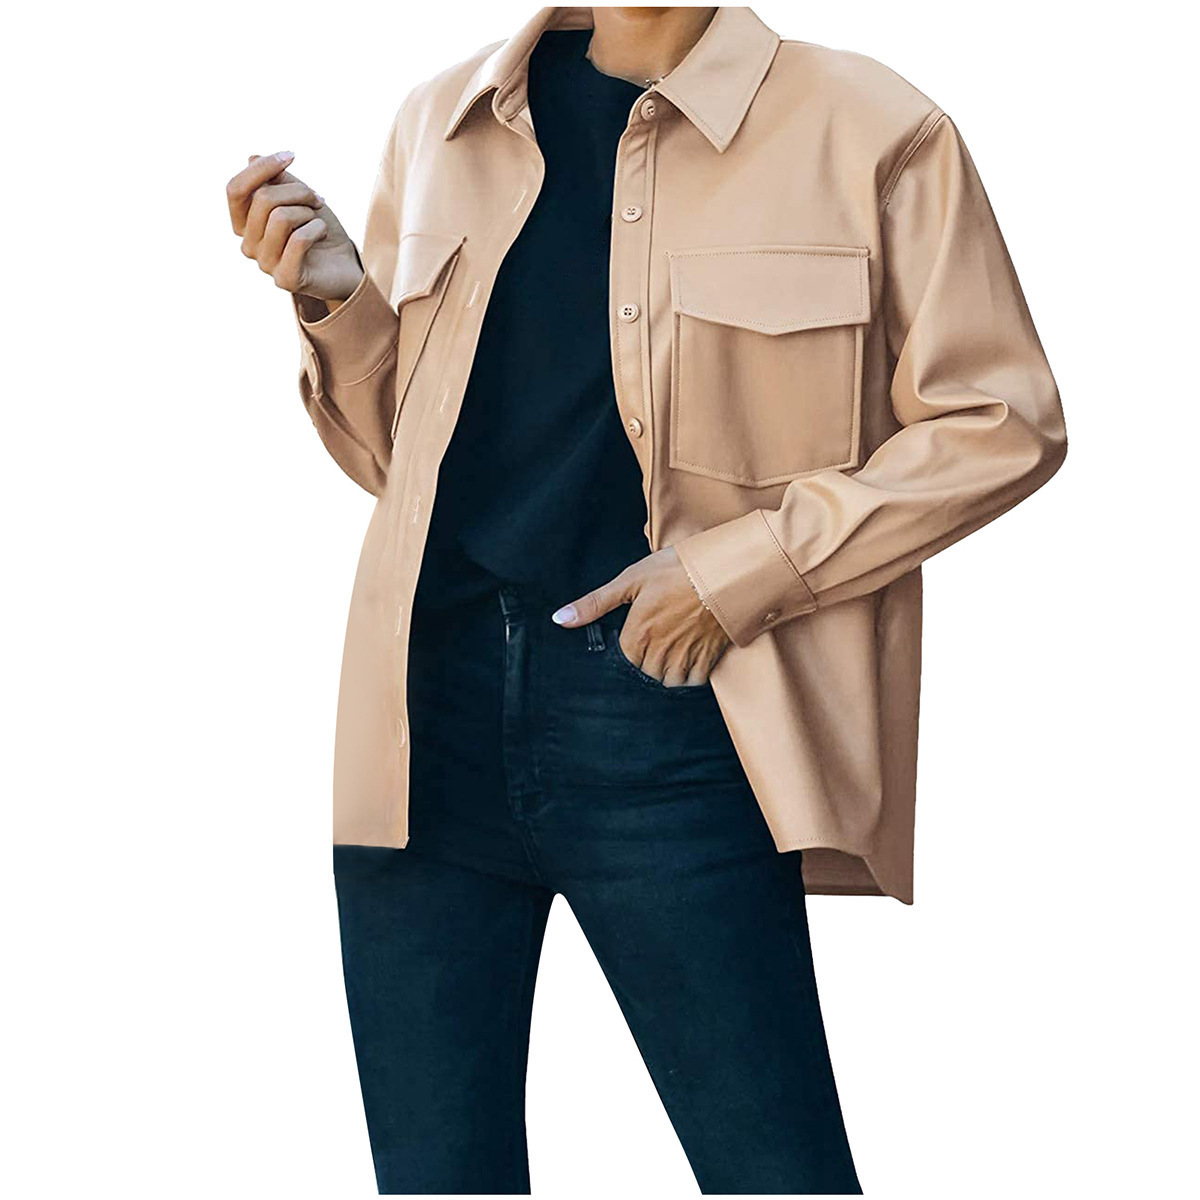 Europe And America Cross-border Women With Breast Pocket Button Casual Short Long Sleeve Jacket PU Leather Jacket